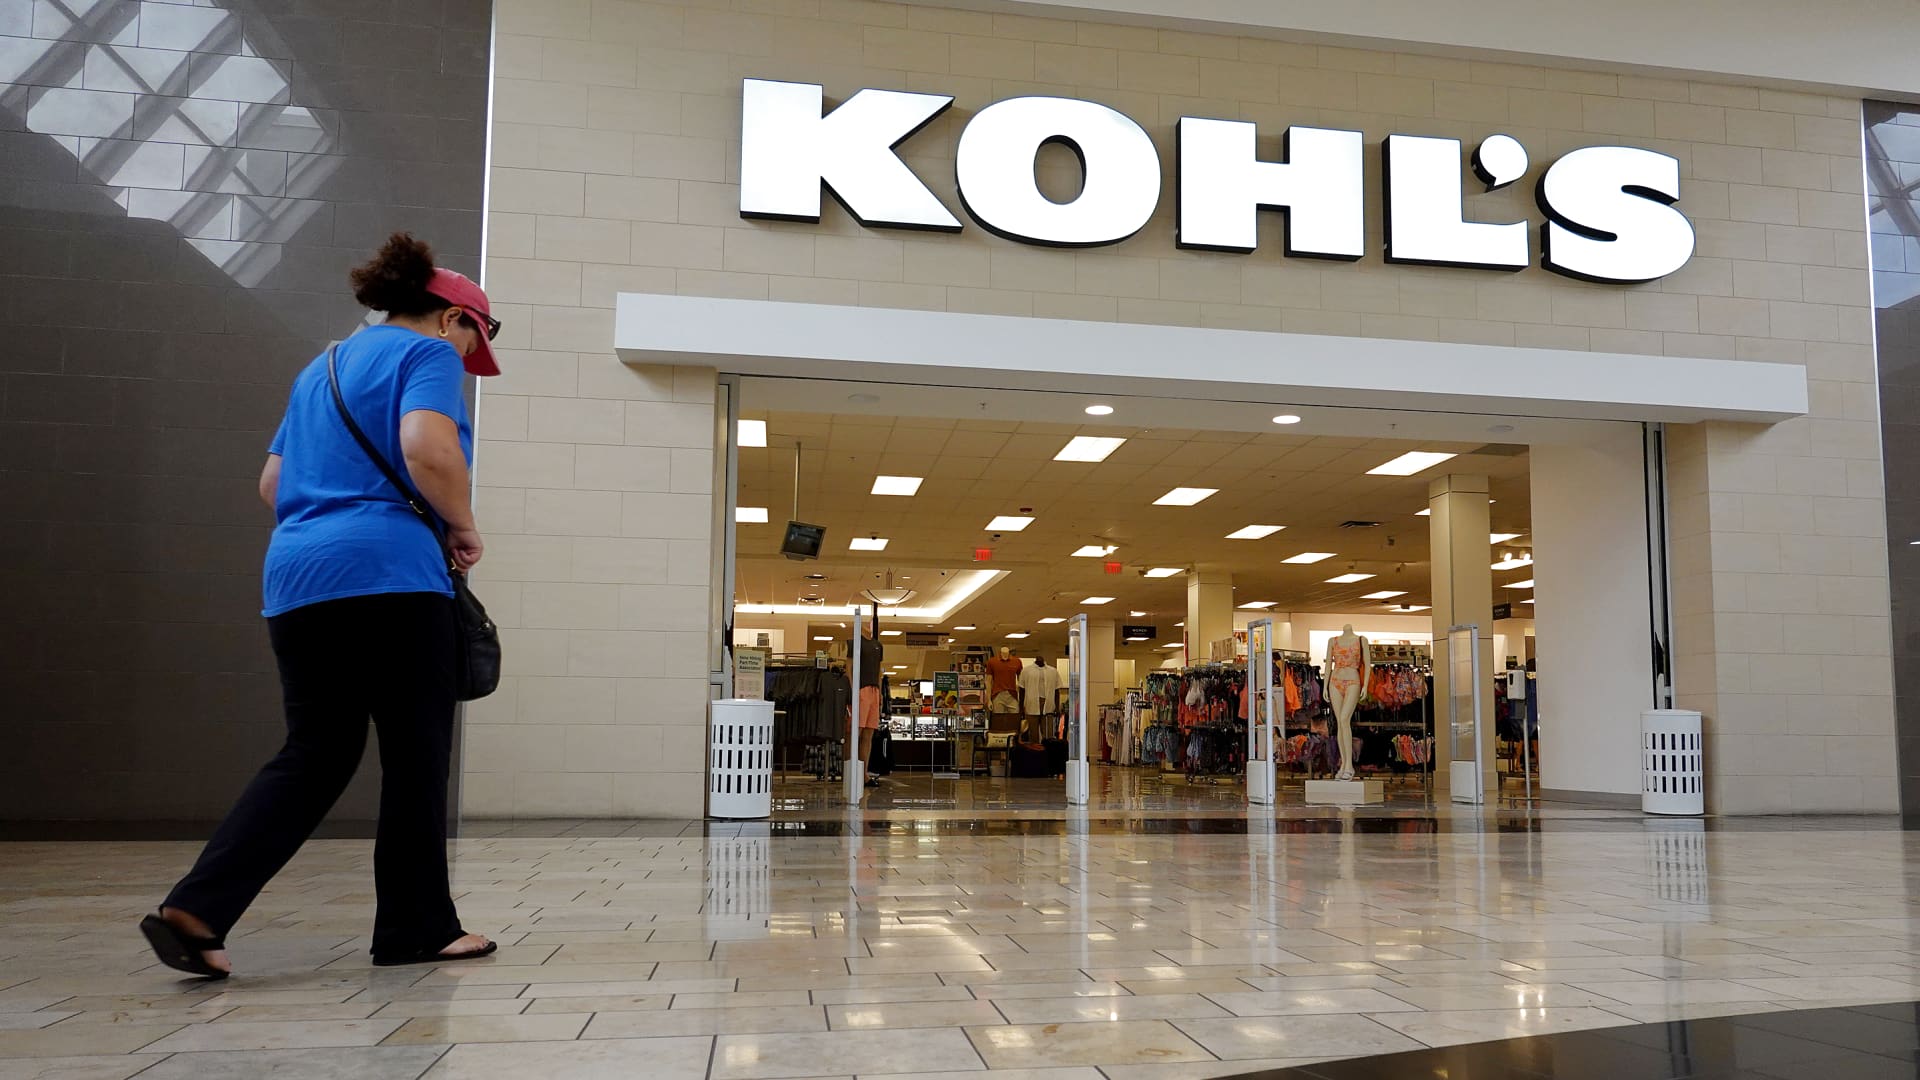 Kohl’s says its chief supply chain officer is leaving